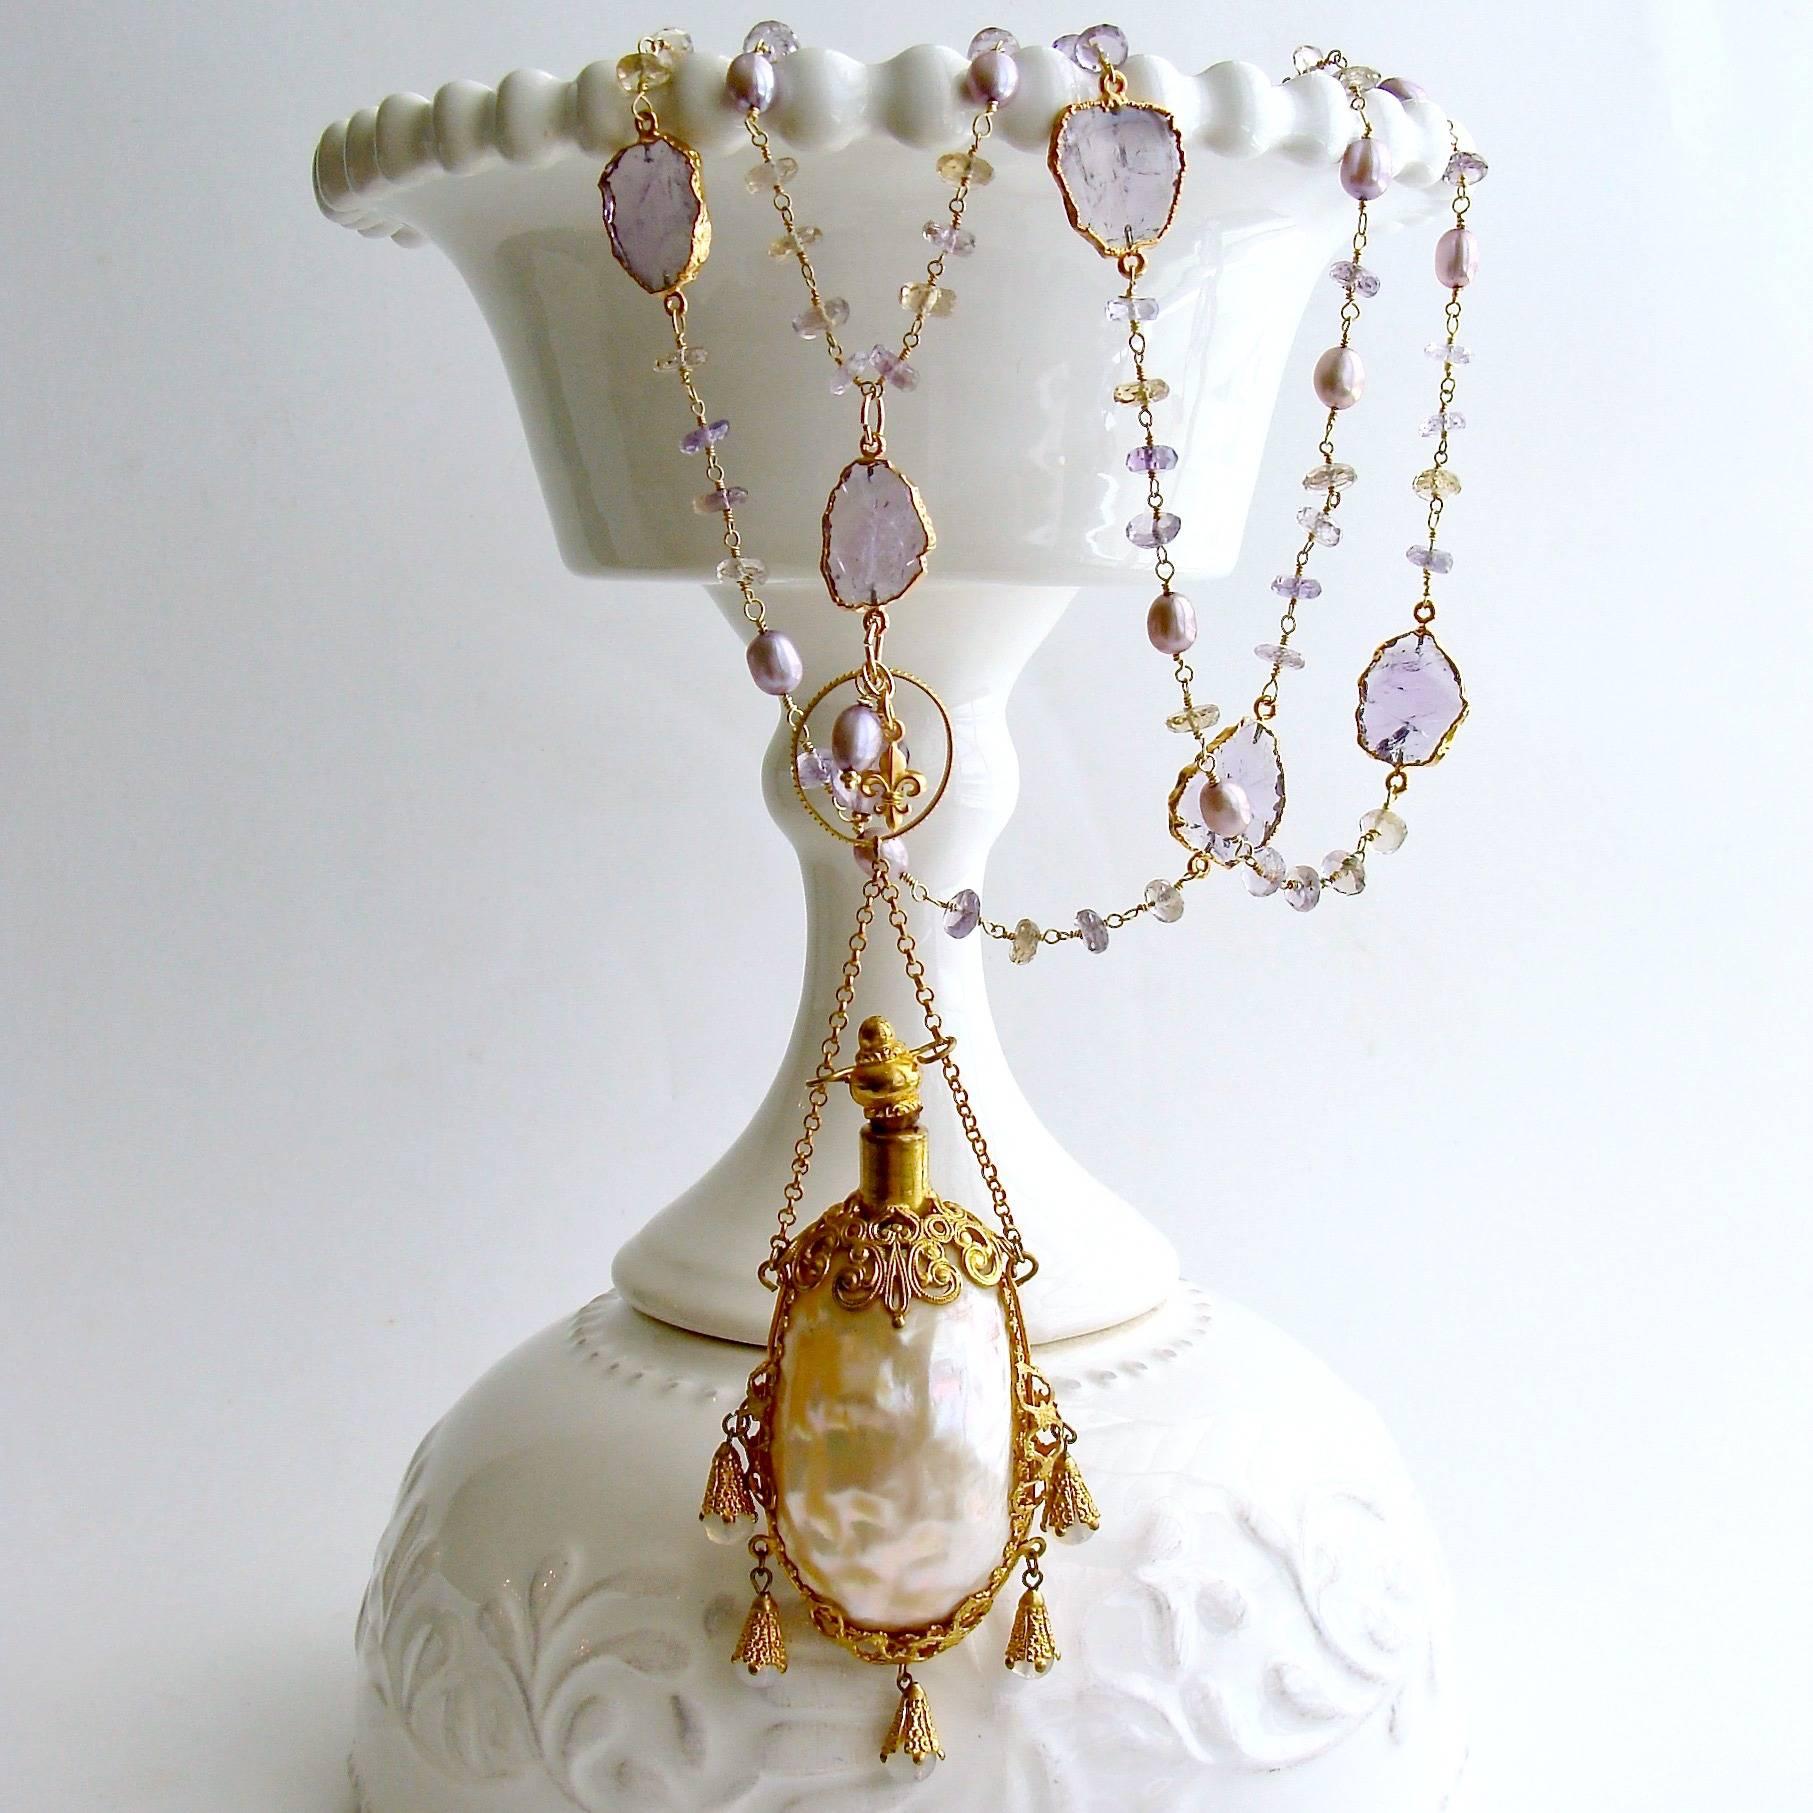 Guinevere III Necklace.

The history of perfume during the Regency Era is a fascinating subject and this delicate necklace pays homage to the creativity and workmanship of that time.  Sparkling a delicately shaded ametrine rondelles are hand linked